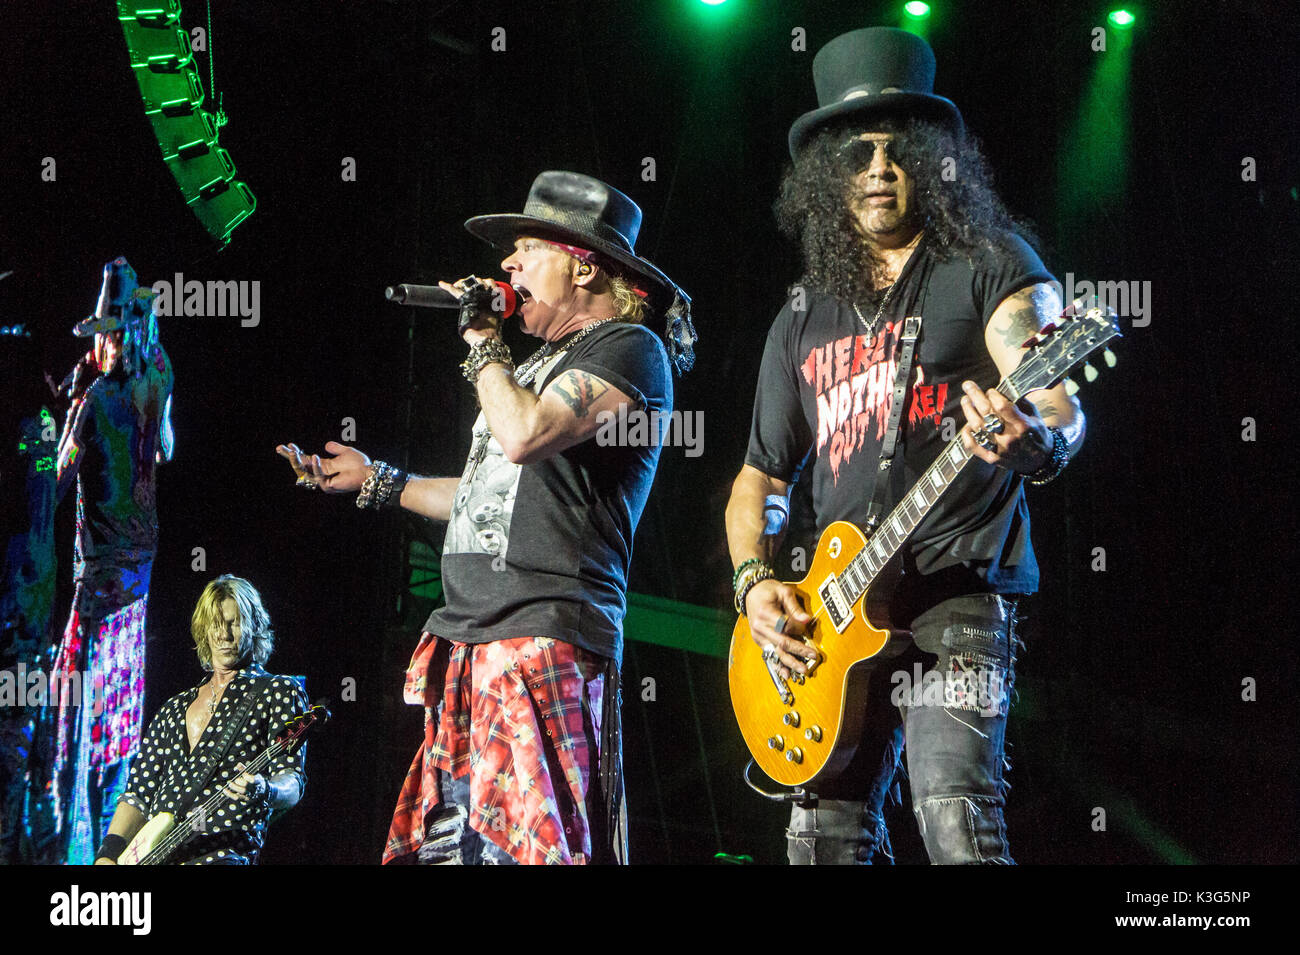 Vancouver, CANADA. 1st Sep, 2017. American rock band Guns N' Roses  performing during their 'Not In This Lifetime' tour at BC Place Stadium in  Vancouver, BC, CANADA. Credit: Jamie Taylor/Alamy Live News